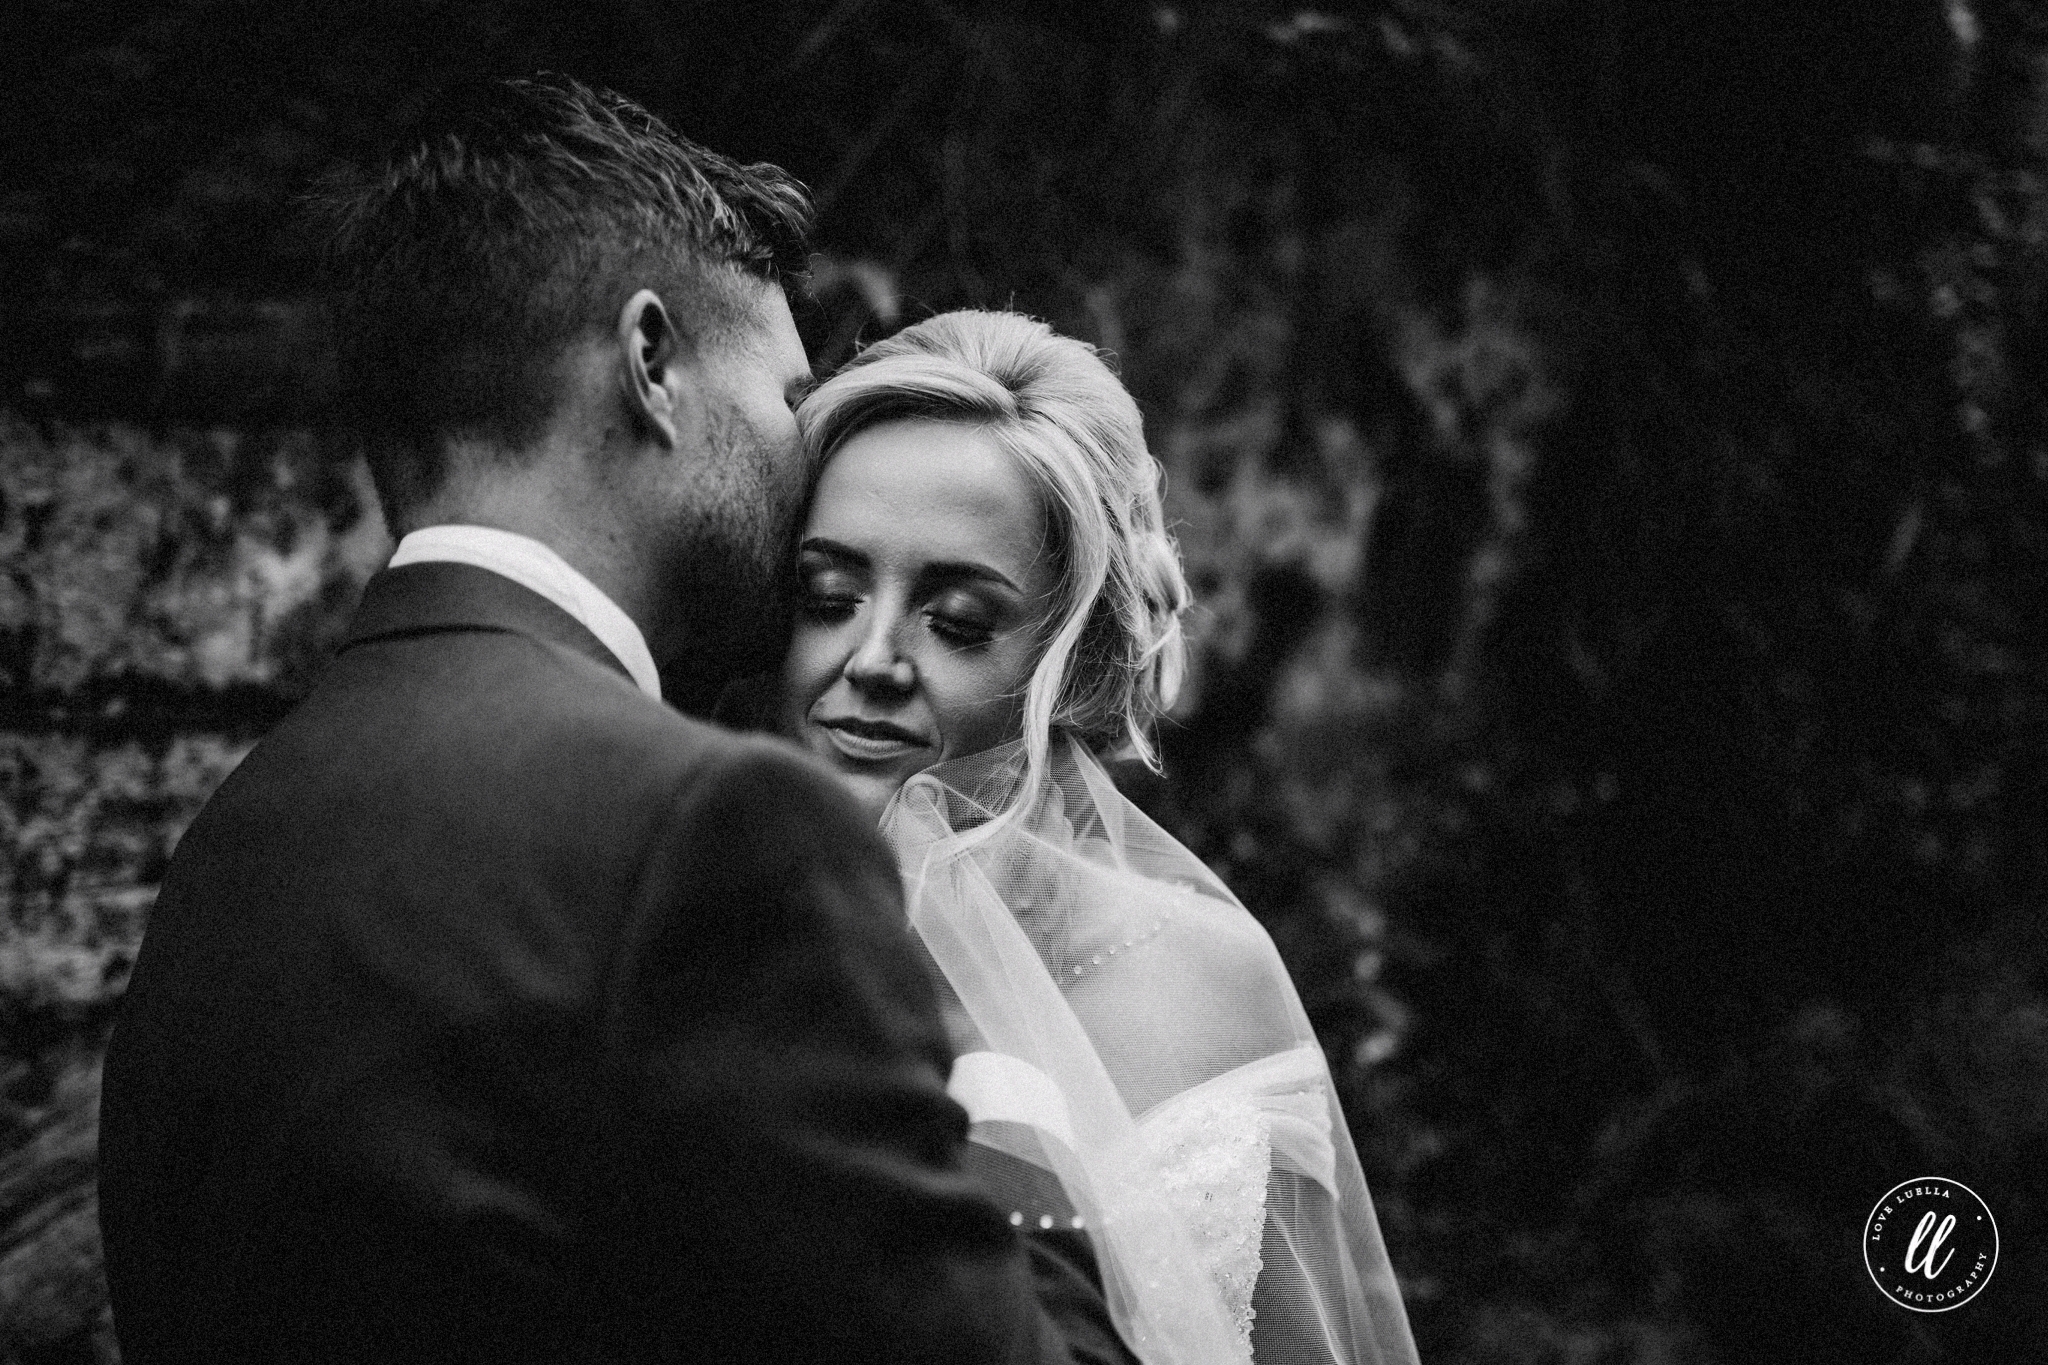 Emotional Moment Between Bride And Groom At A Chester Wedding